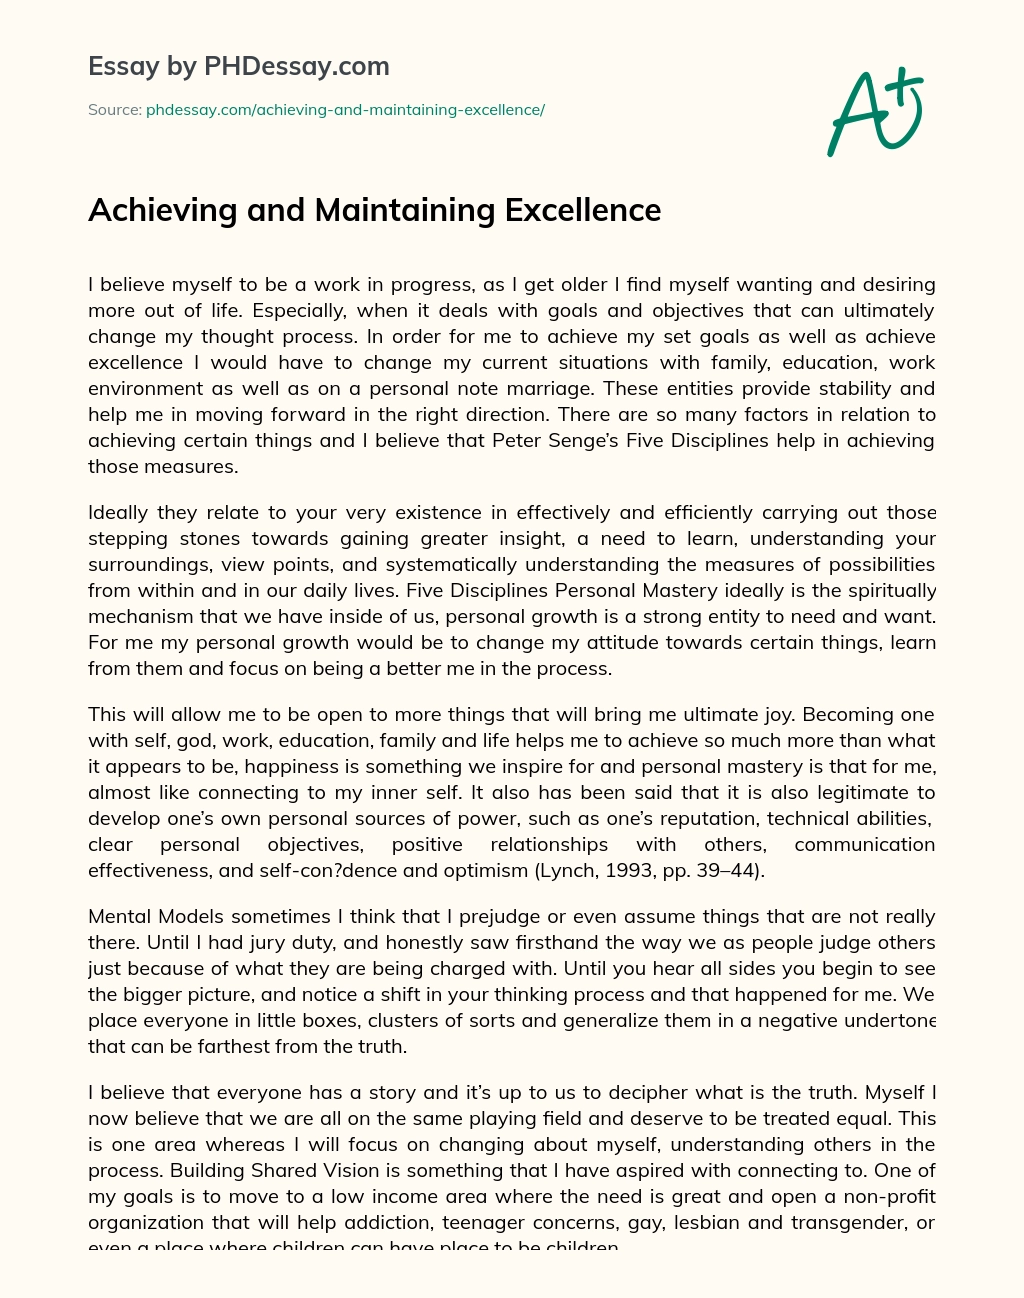 Achieving and Maintaining Excellence essay